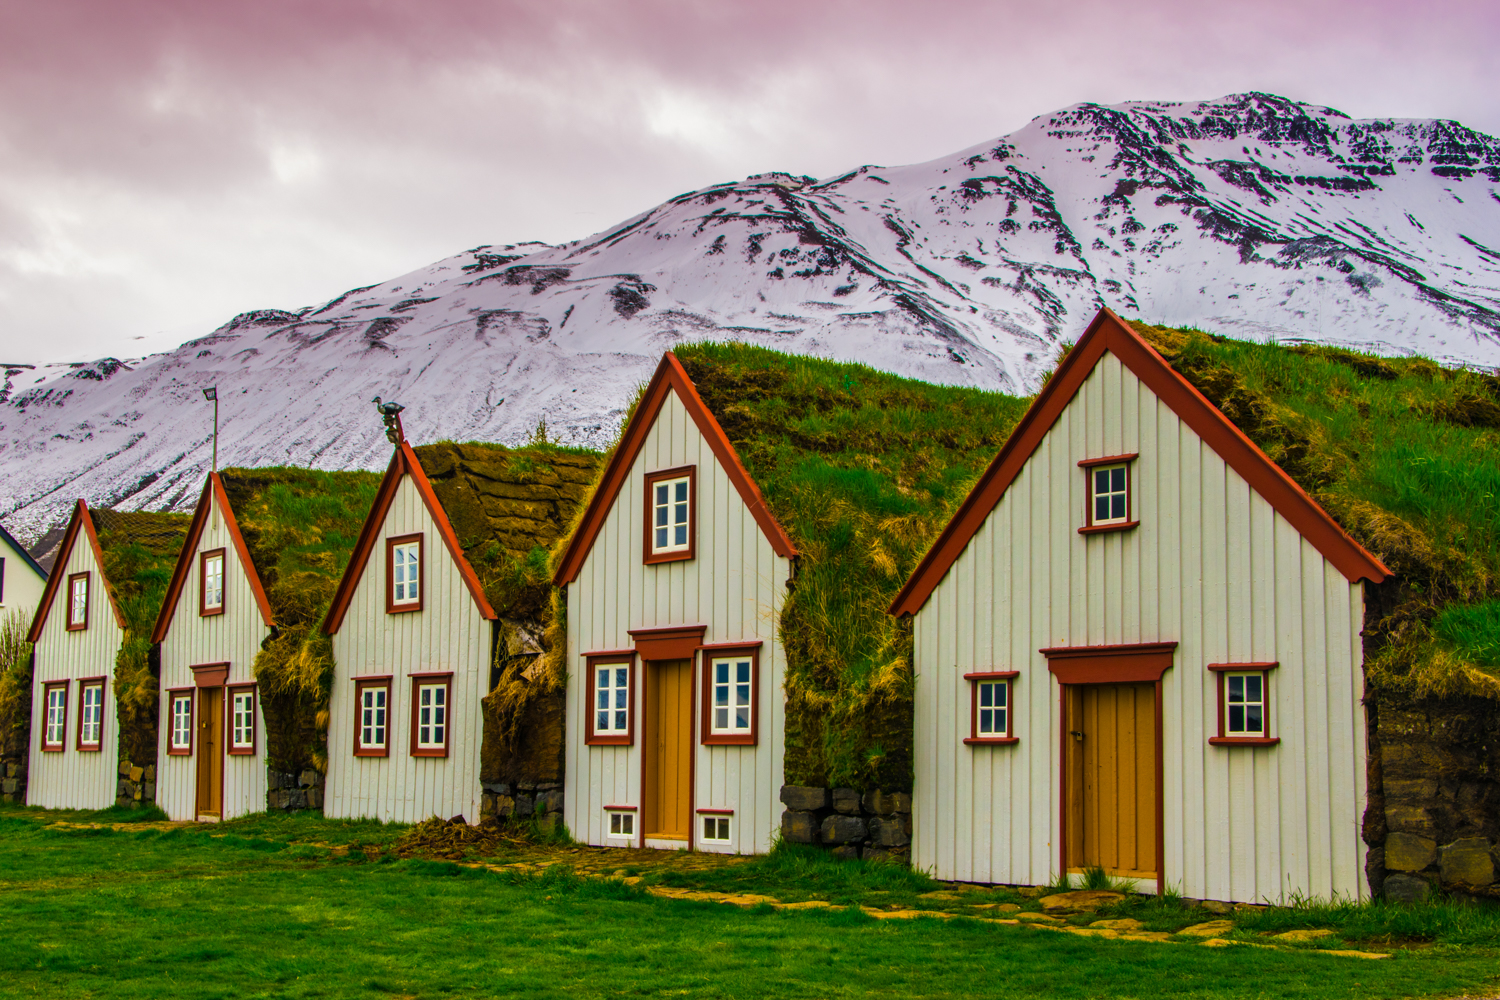 Houses by the side of the road in Iceland